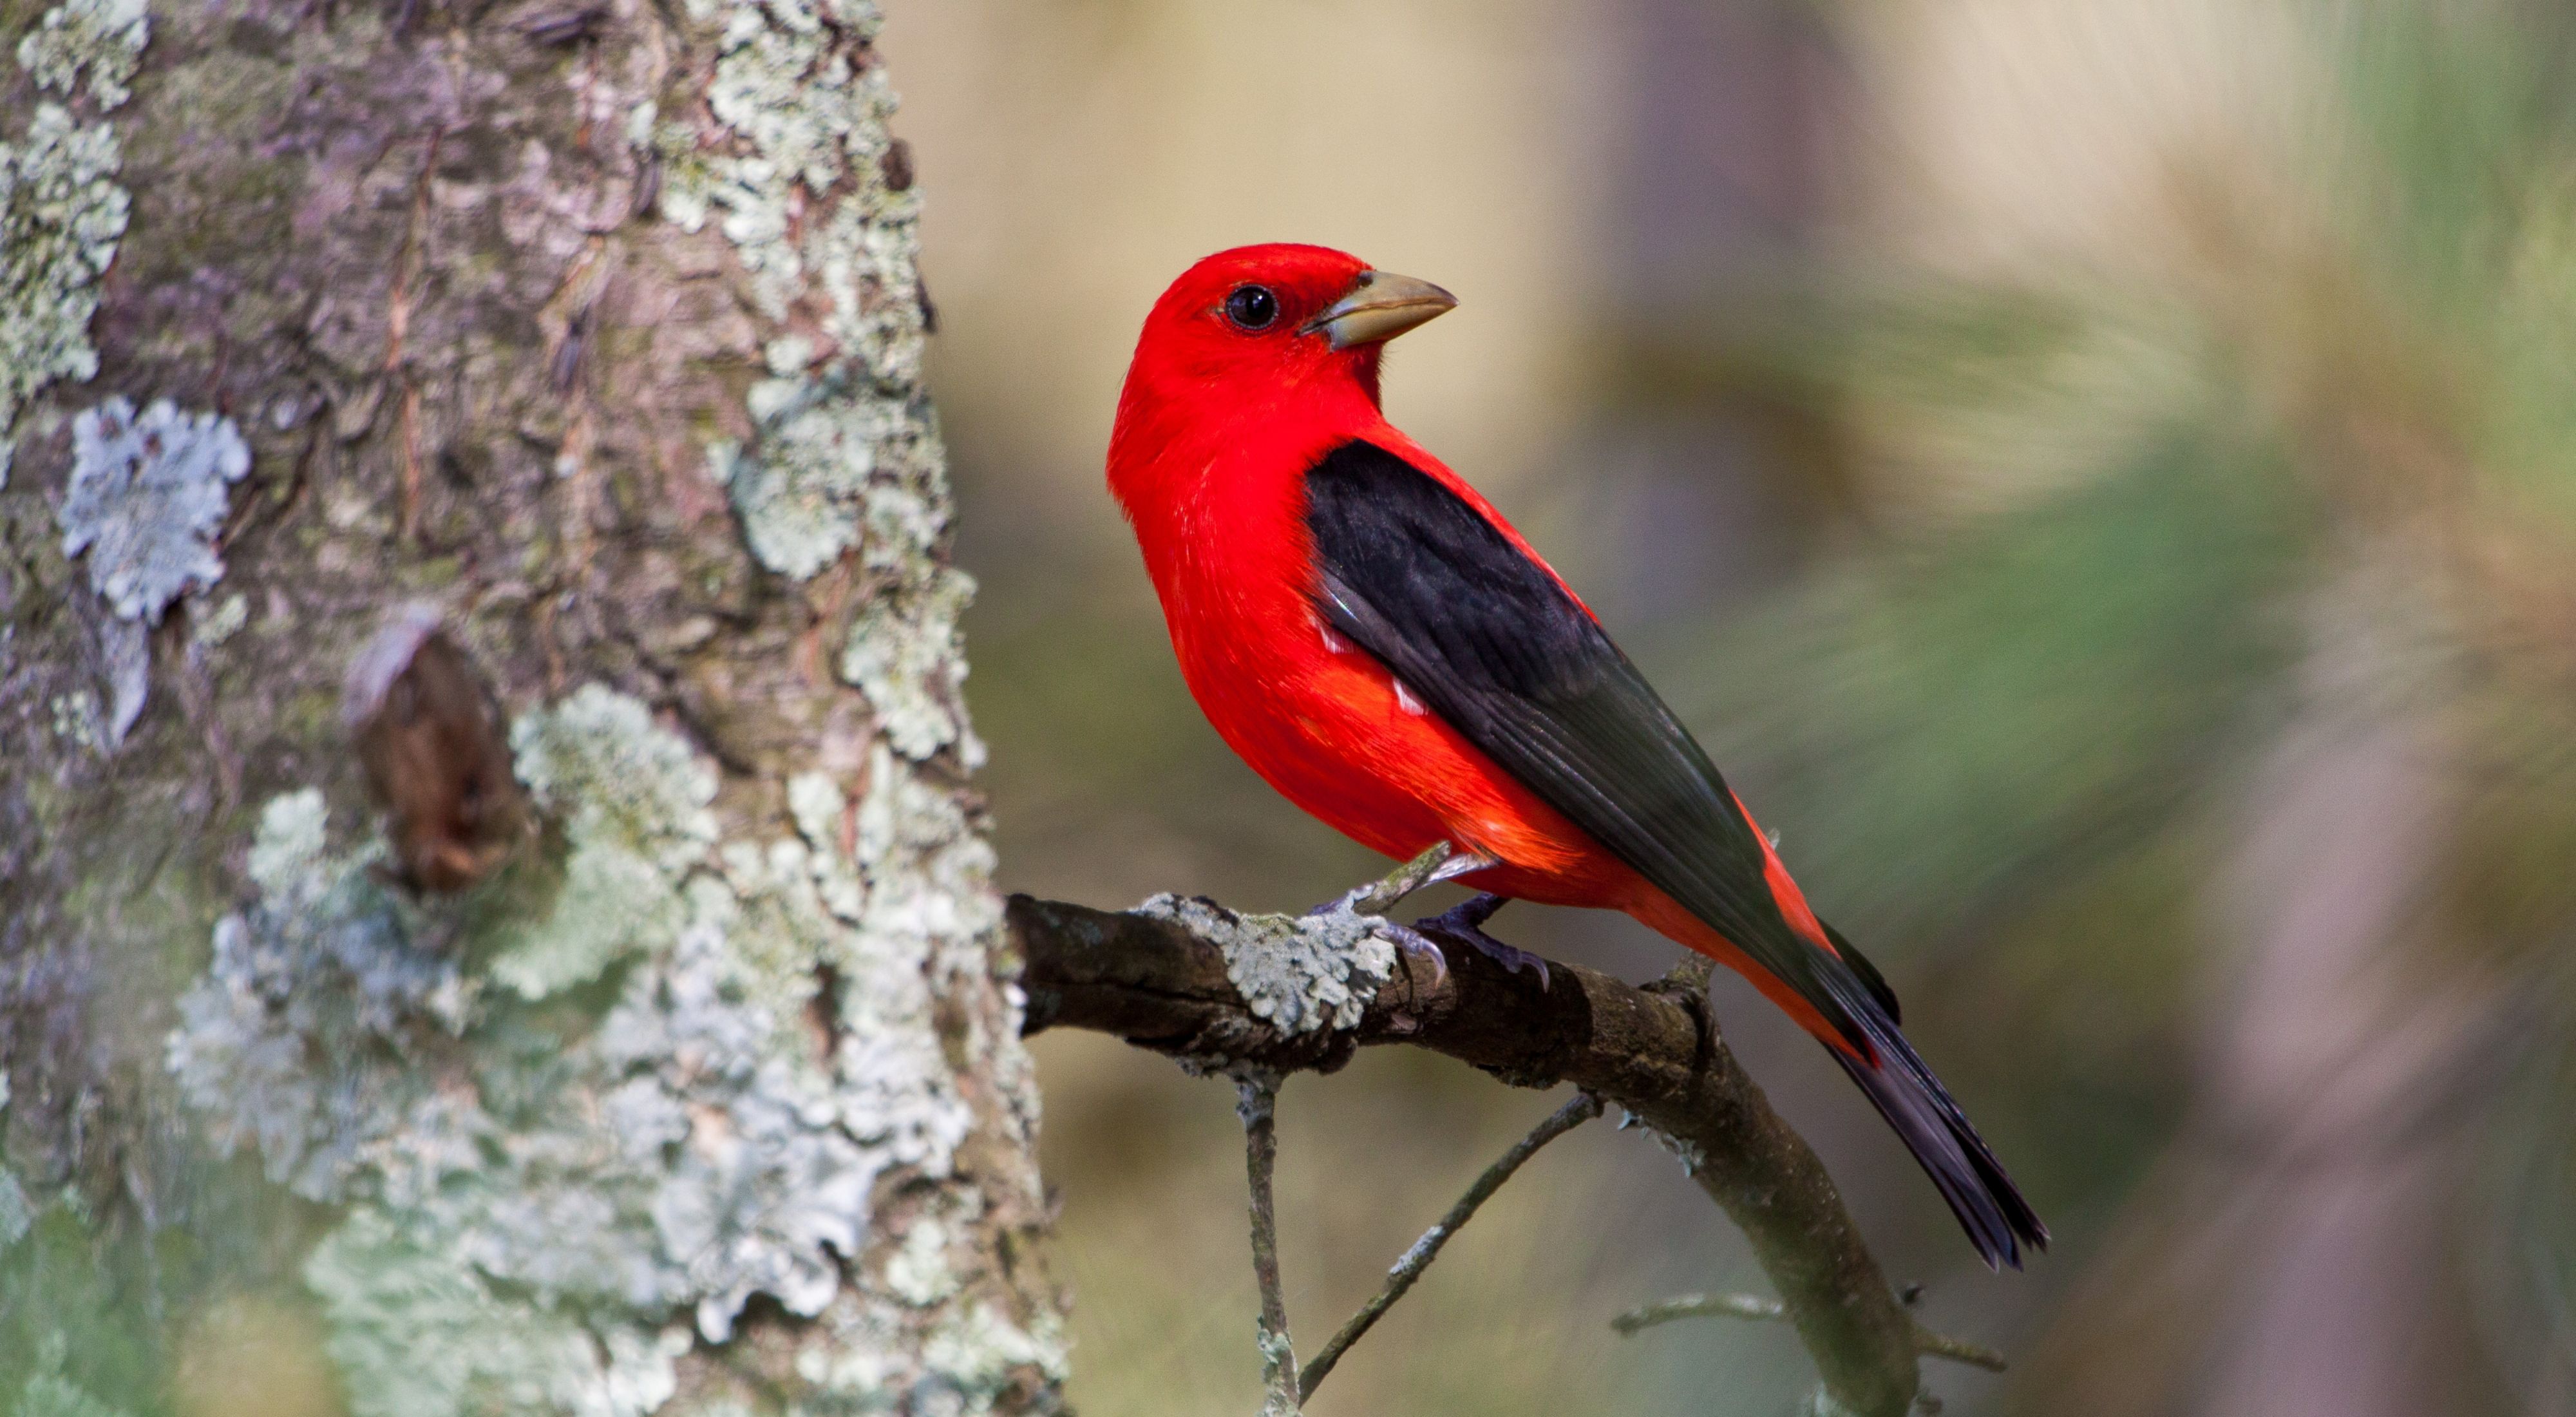 Red bird with black wings and tail feathers perches on the branch of a tree covered with lichens.